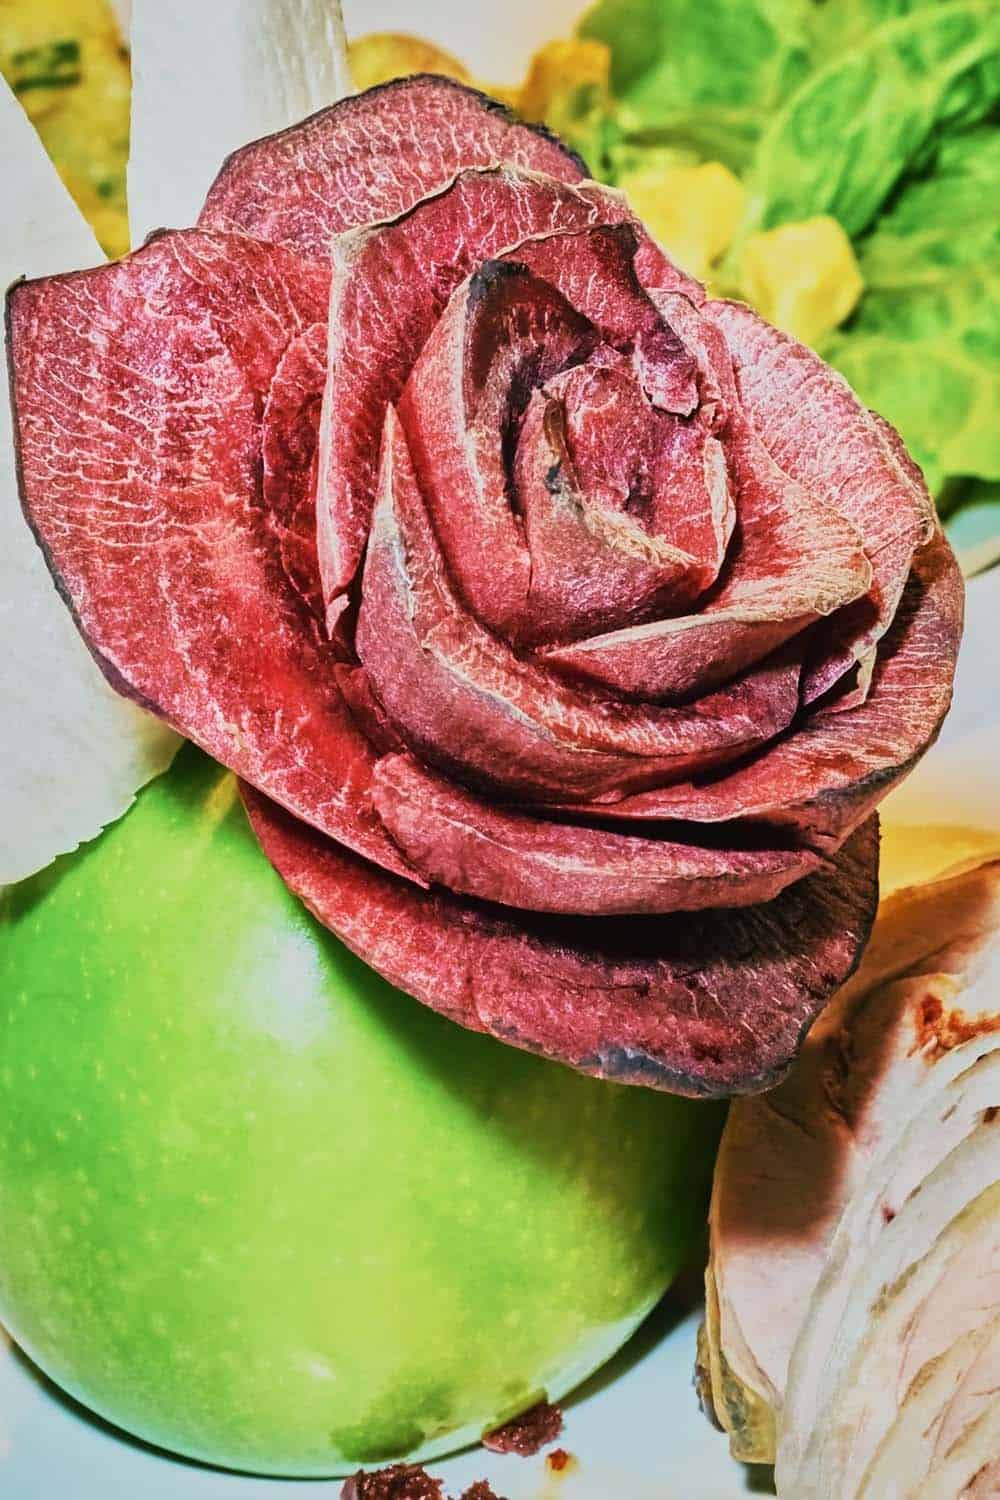 A rose made out of deli meat.